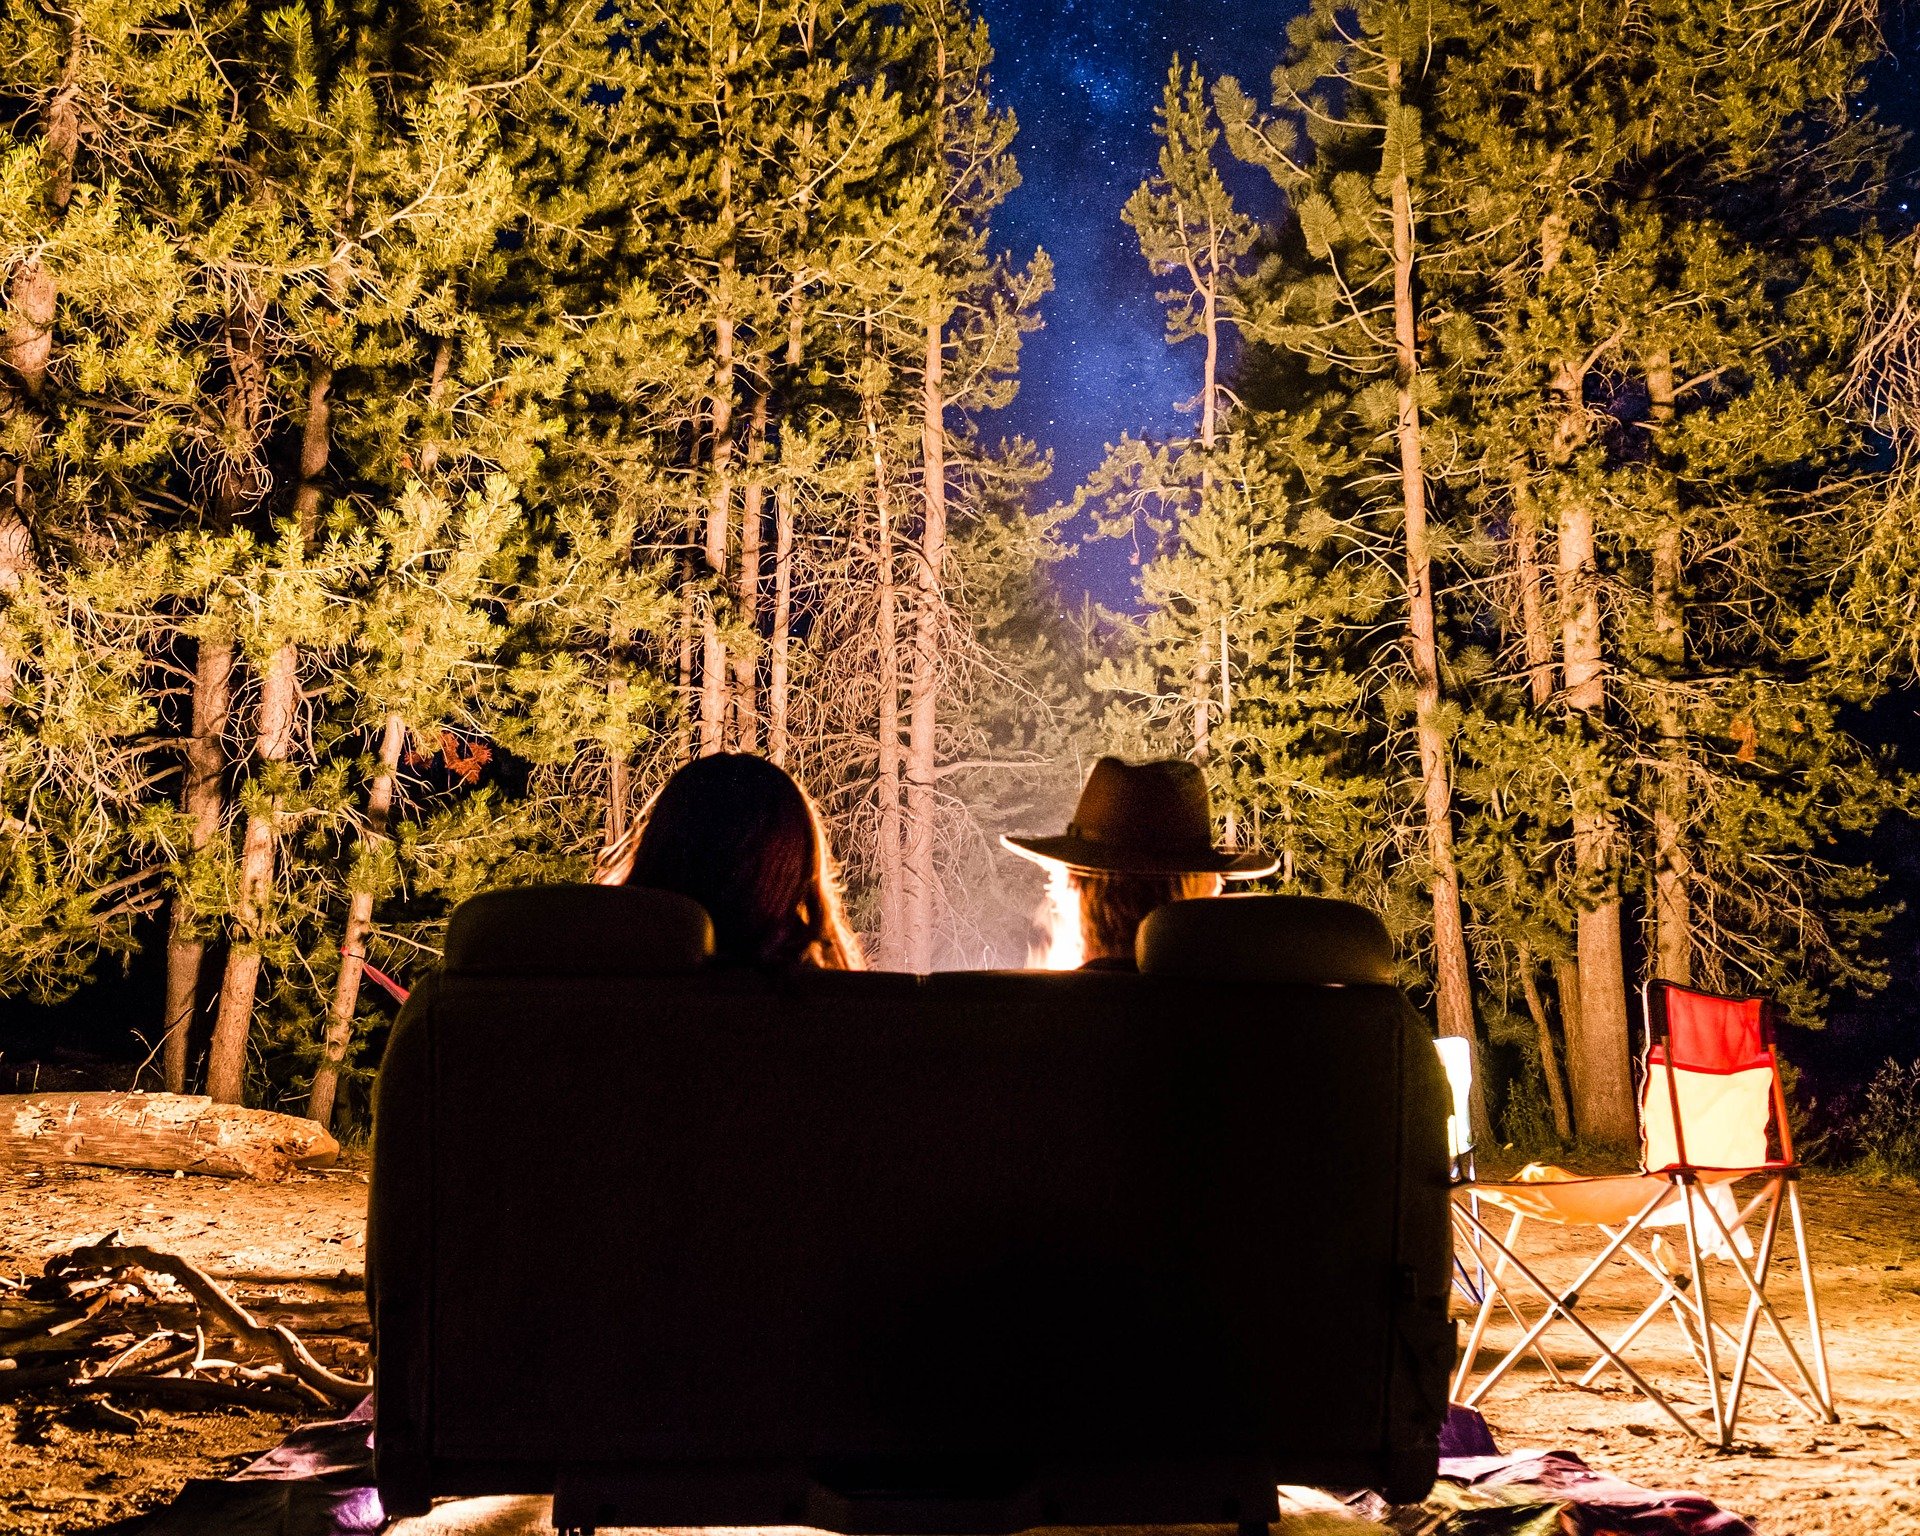 Two people sitting in front of a campfire in a forest